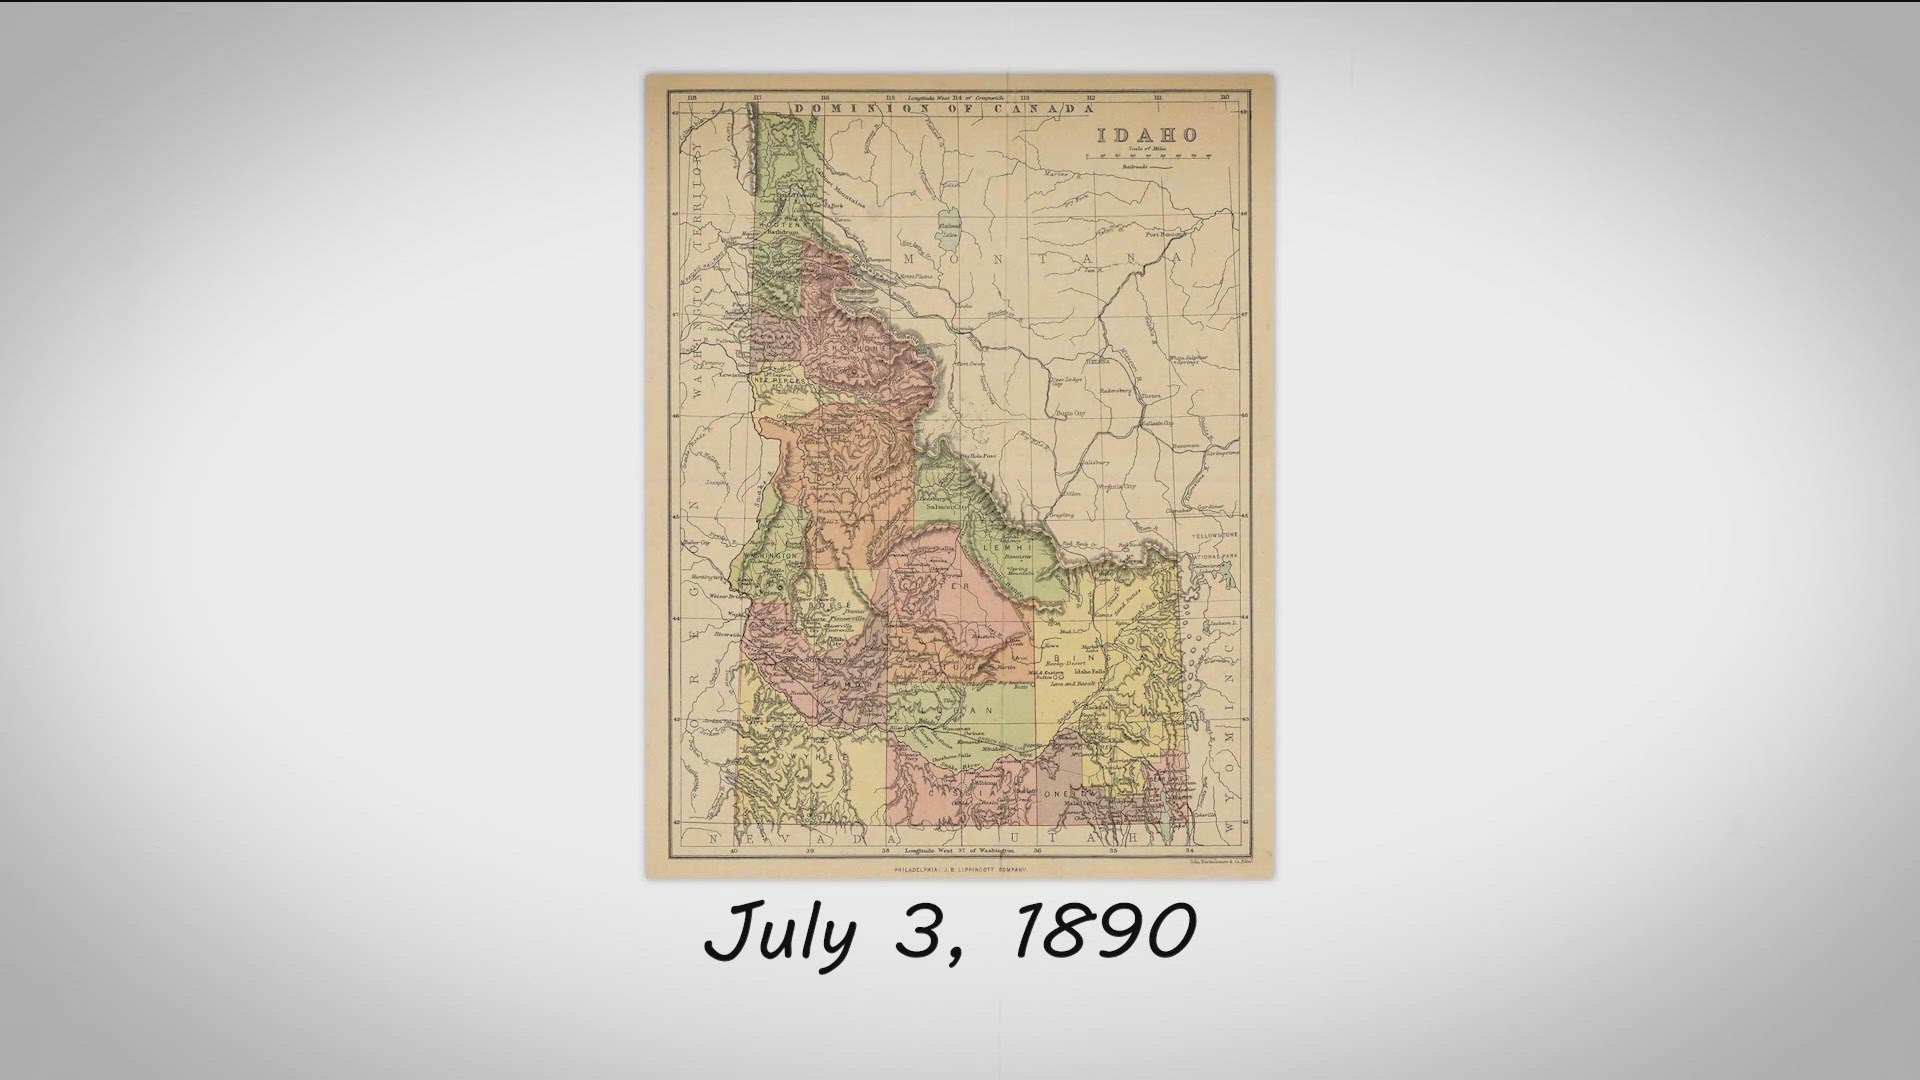 On July 3, 1890, Idaho was officially declared as the 43 state in the United States.